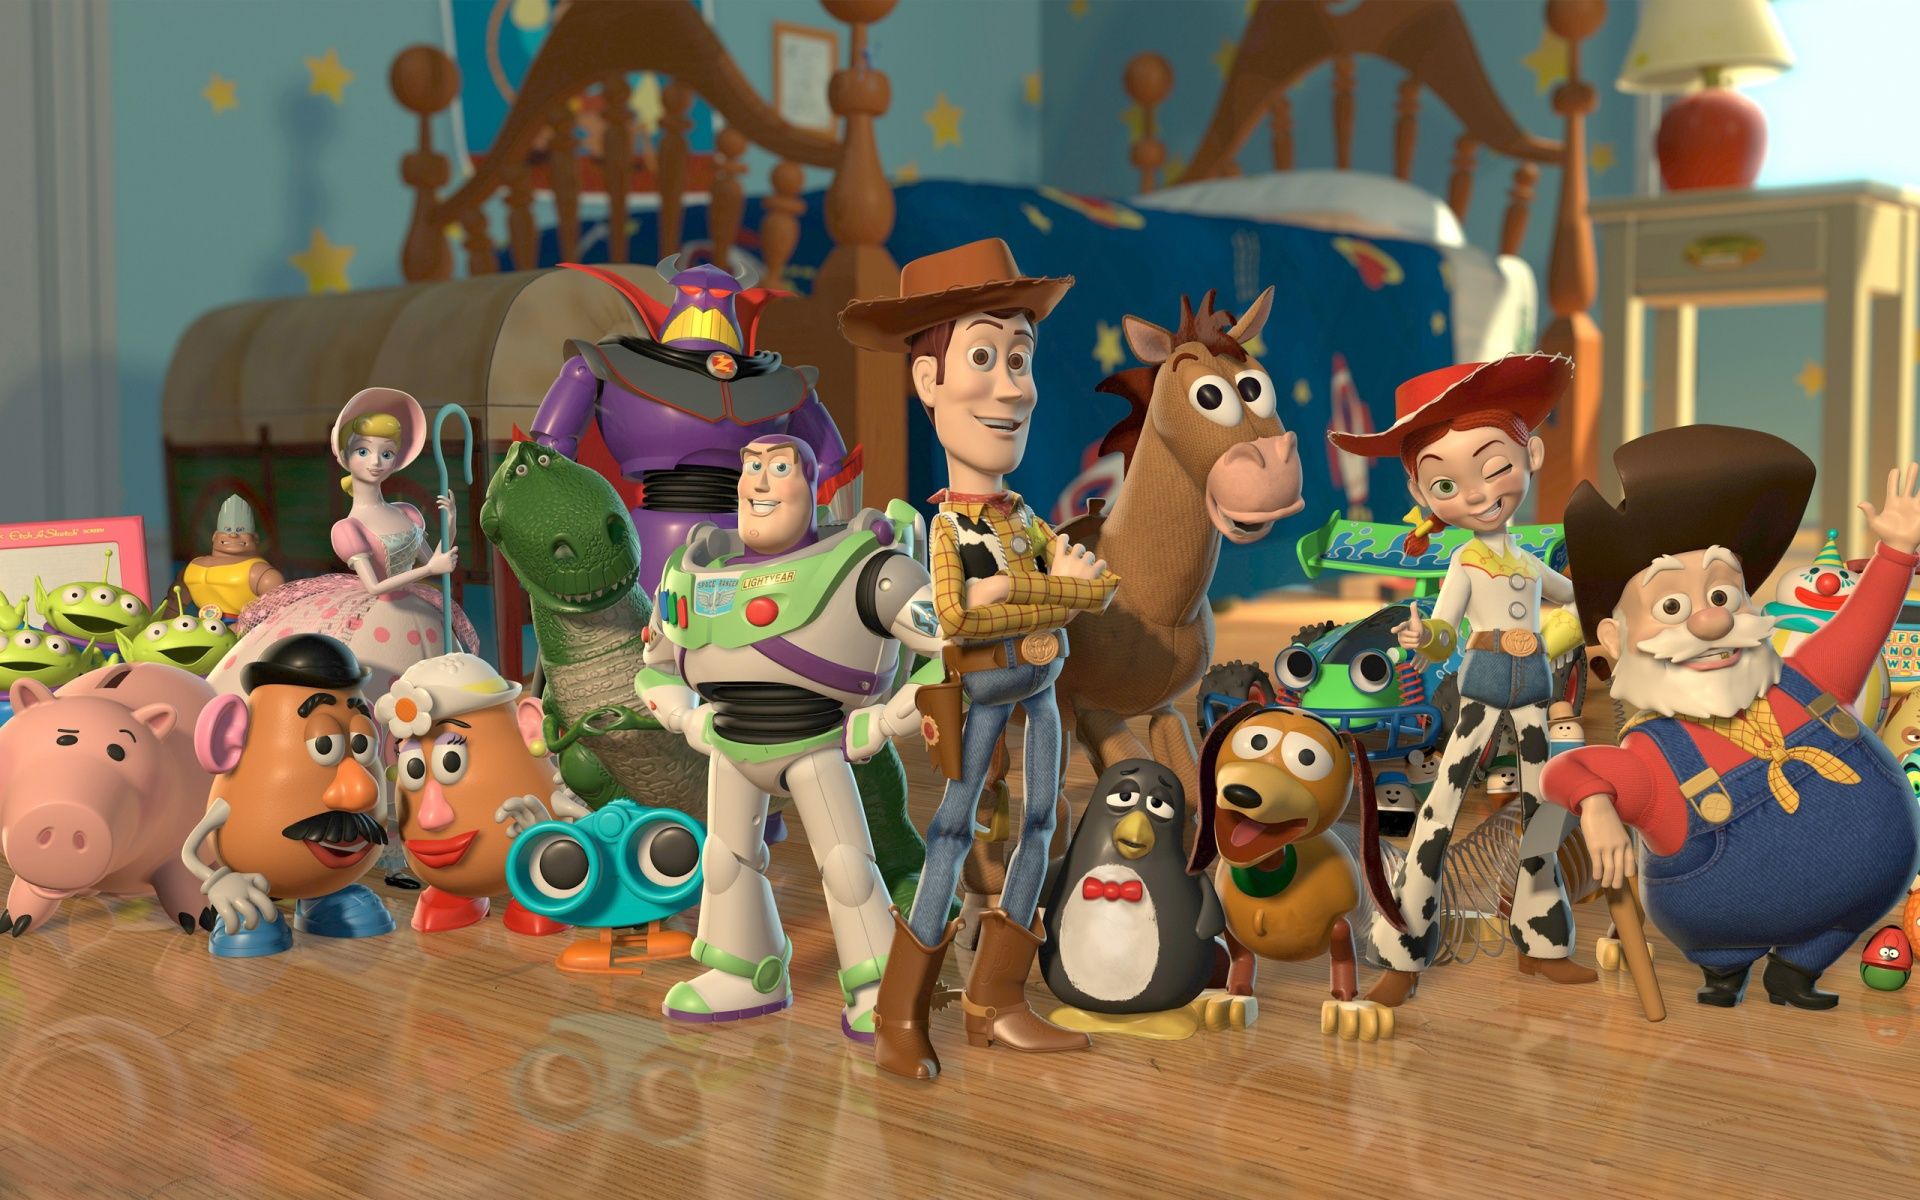 Toy Story Computer Wallpapers, Desktop Backgrounds 1920x1200